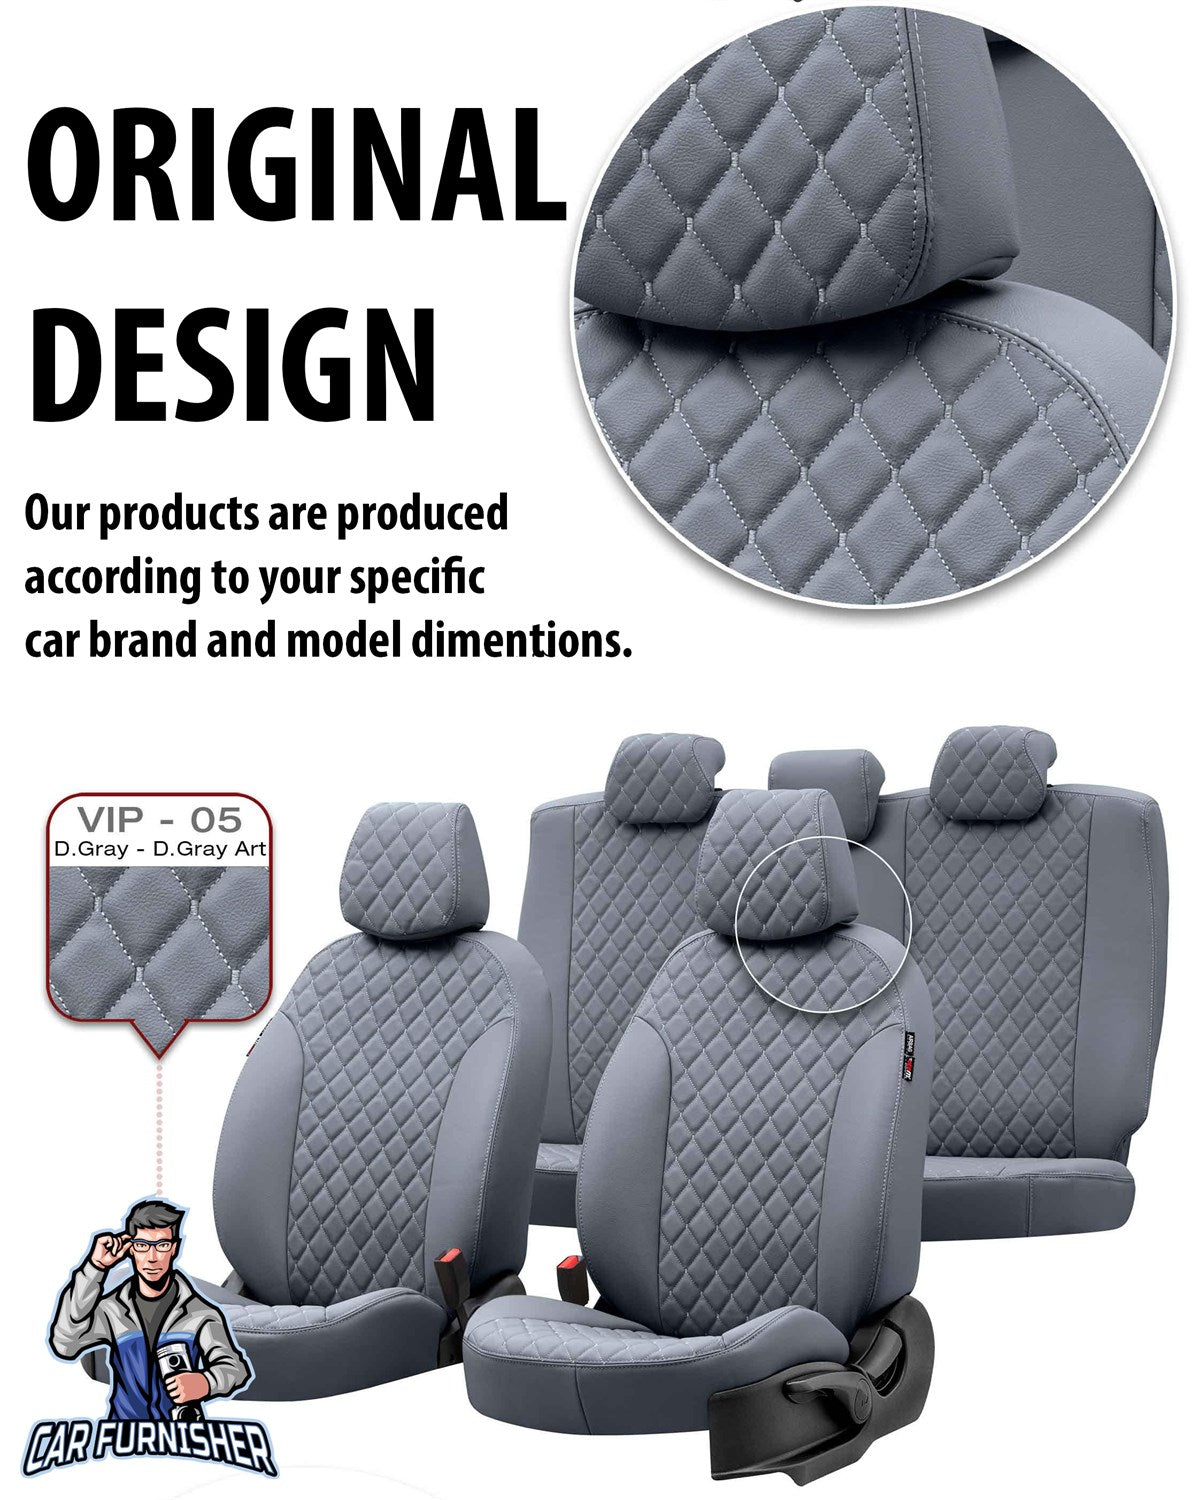 Honda HRV Seat Covers Madrid Leather Design Smoked Leather